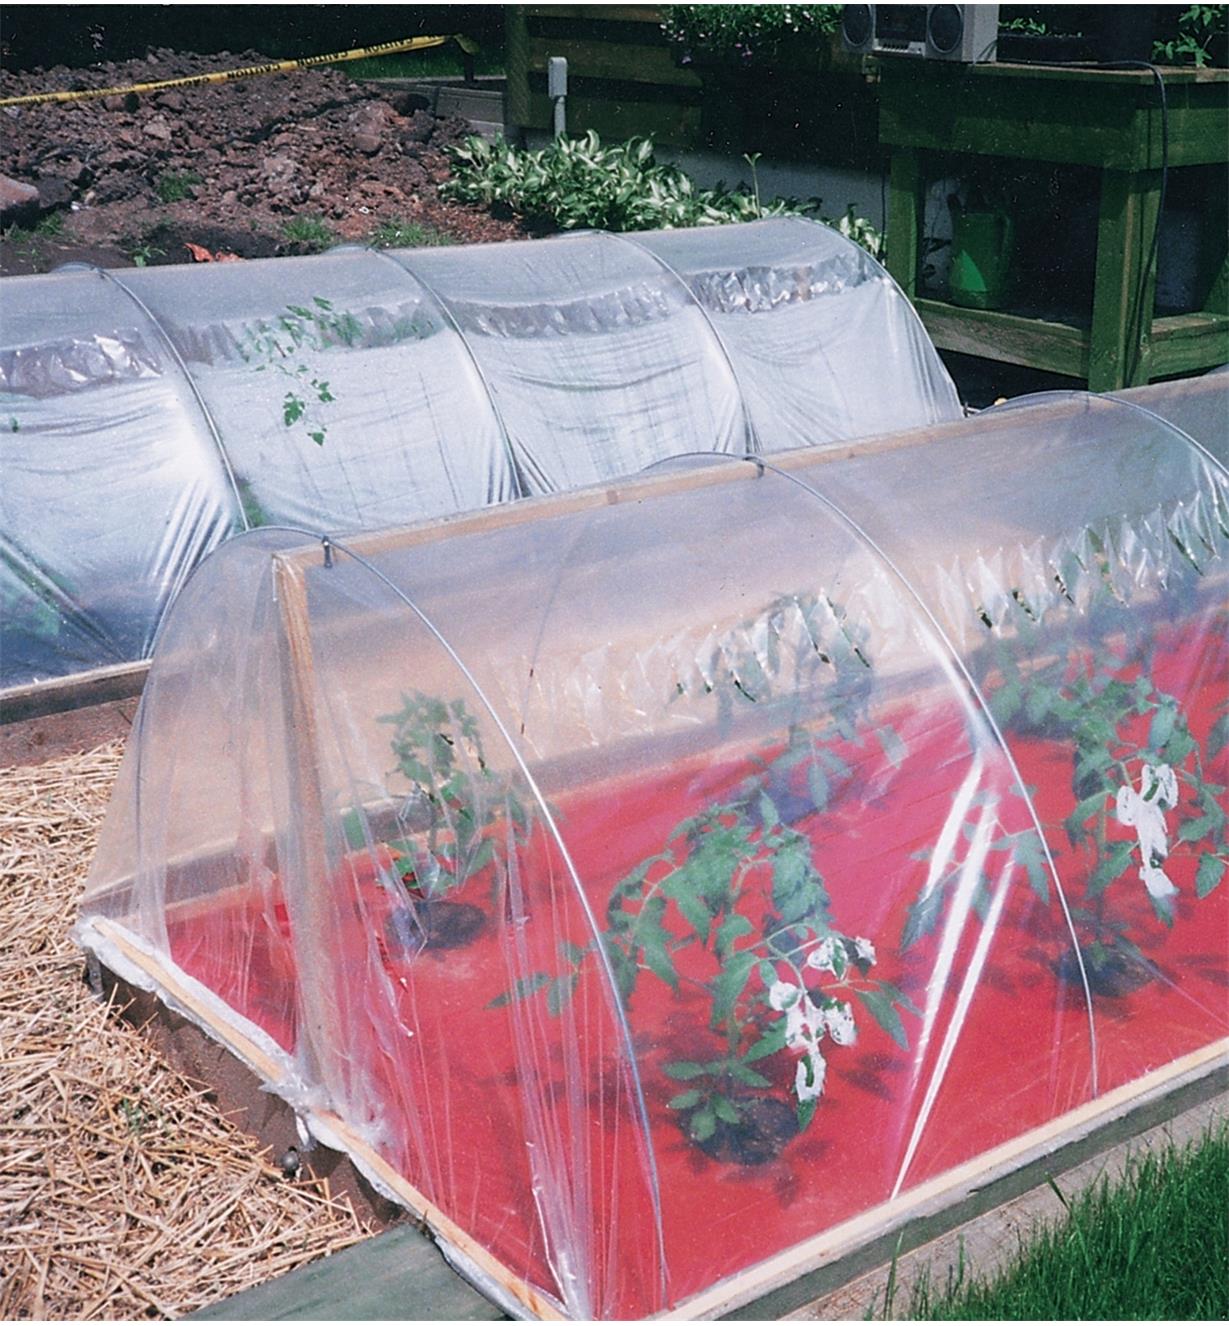 Hoops used to hold plastic film over garden rows